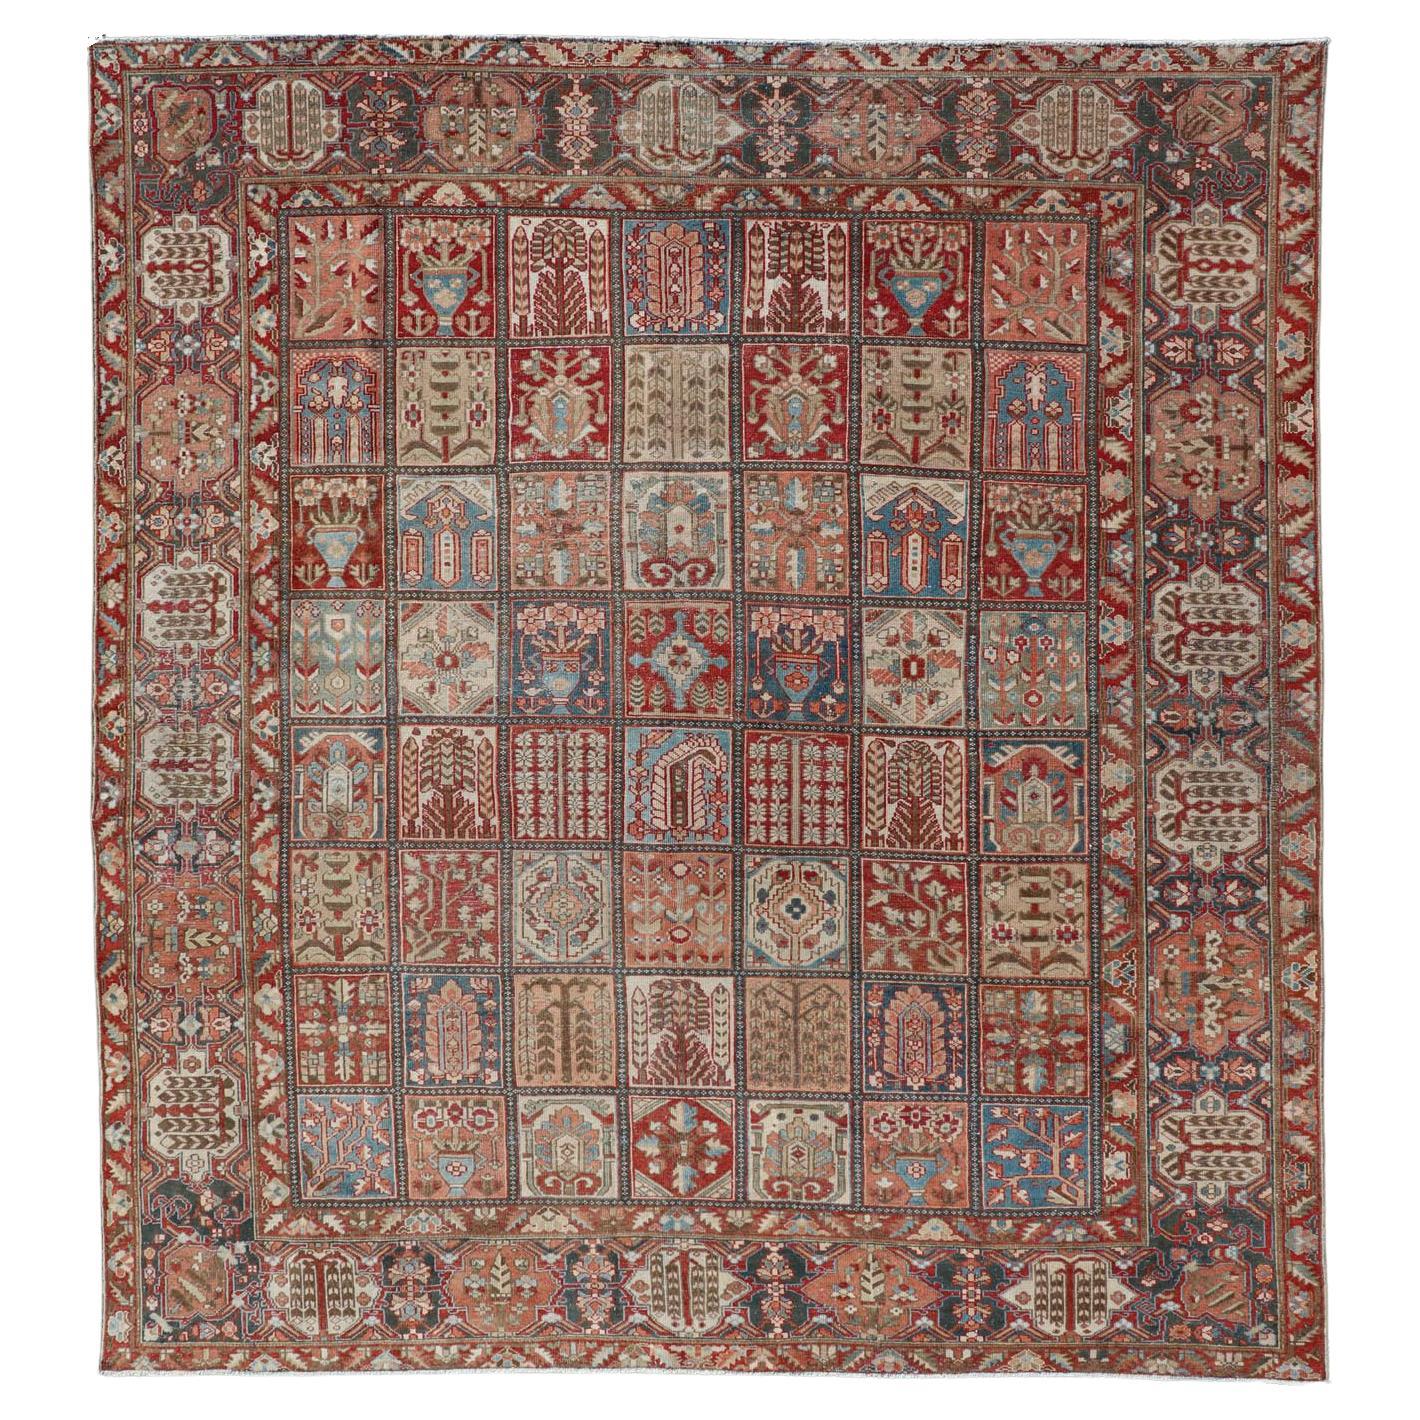 Square Persian Large Bakhtiari Rug with All-Over Garden Design in Muted Colors